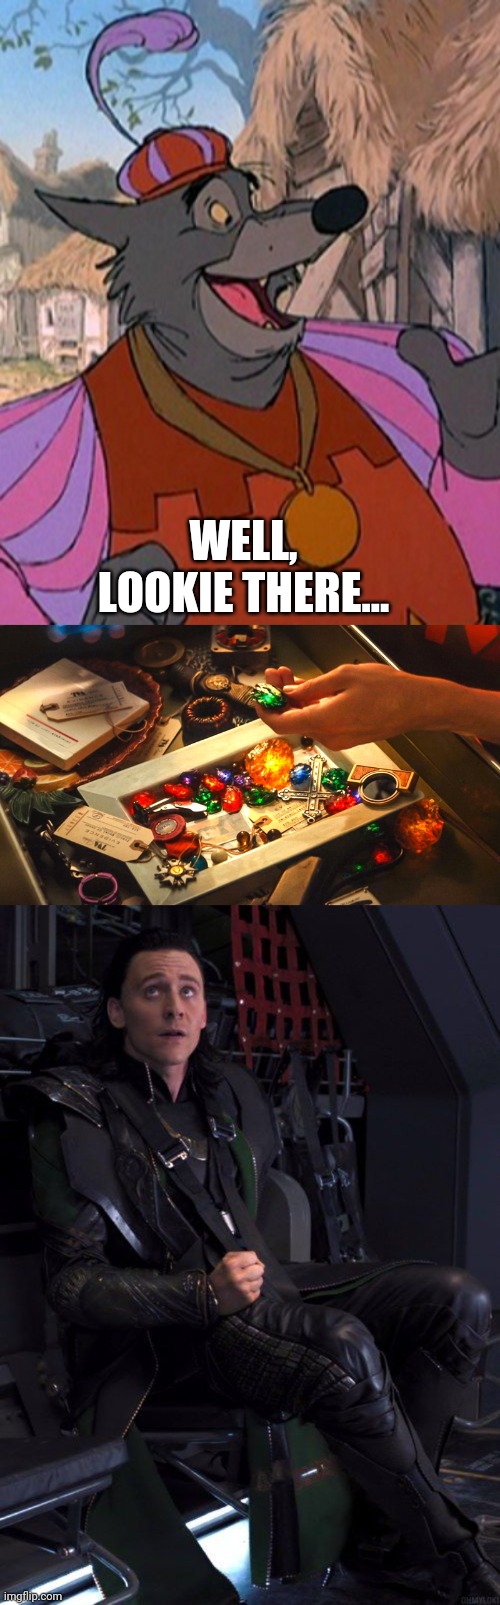 Lokstalgia... | WELL, LOOKIE THERE... | image tagged in funny | made w/ Imgflip meme maker